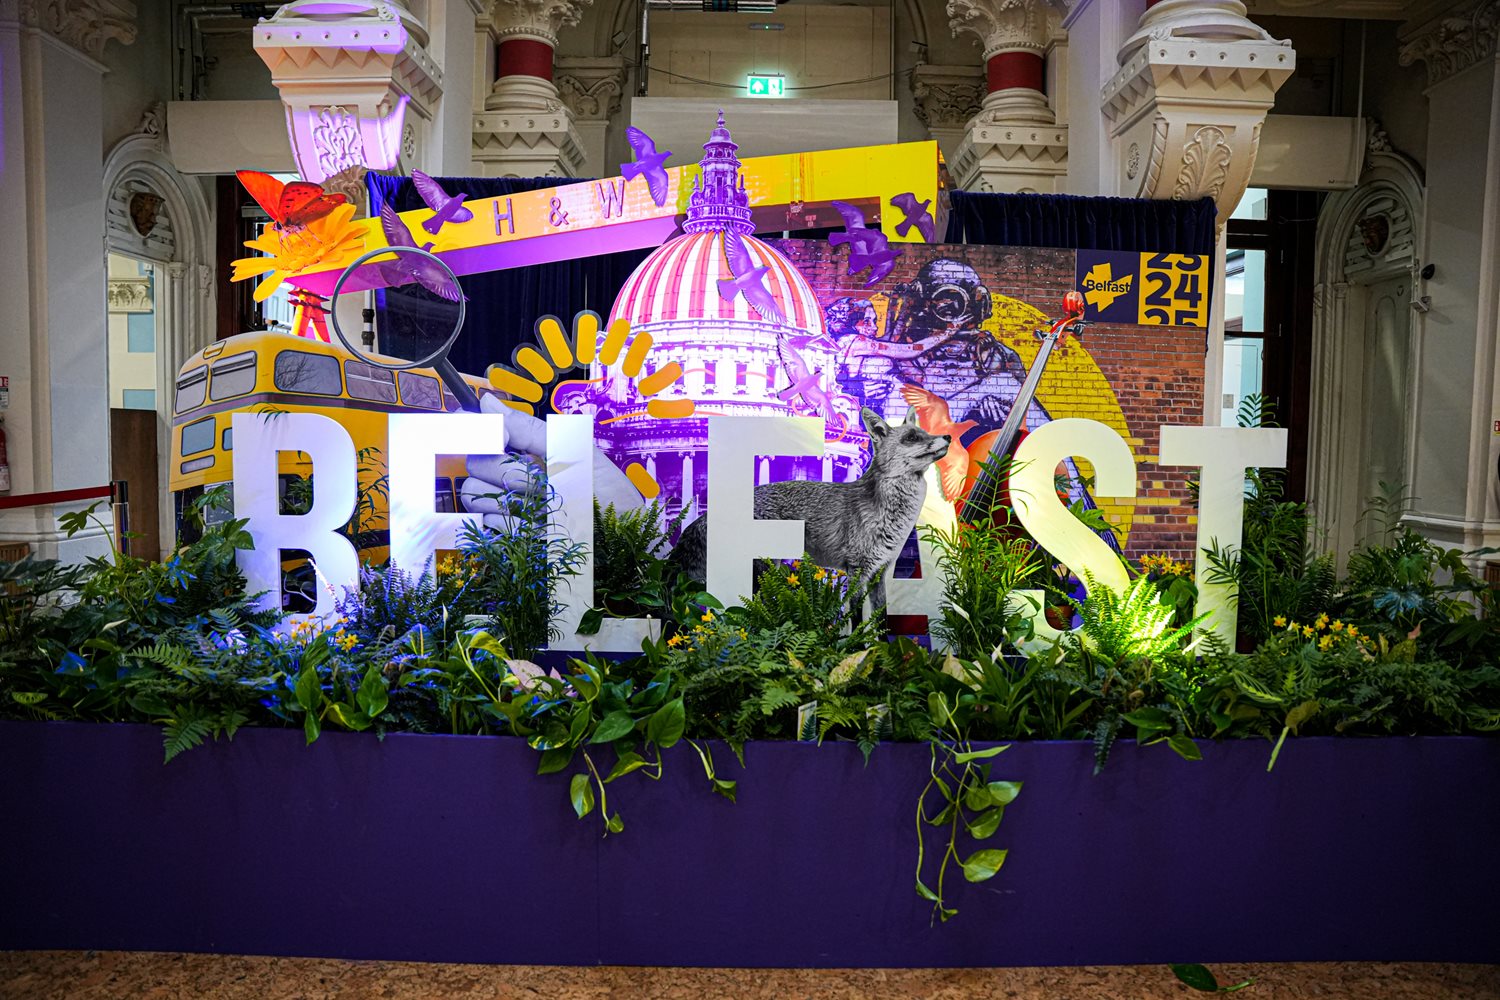 A colourful and engaging indoor display showing the word 'Belfast' surround by green leaves, flowers and creative imagery.